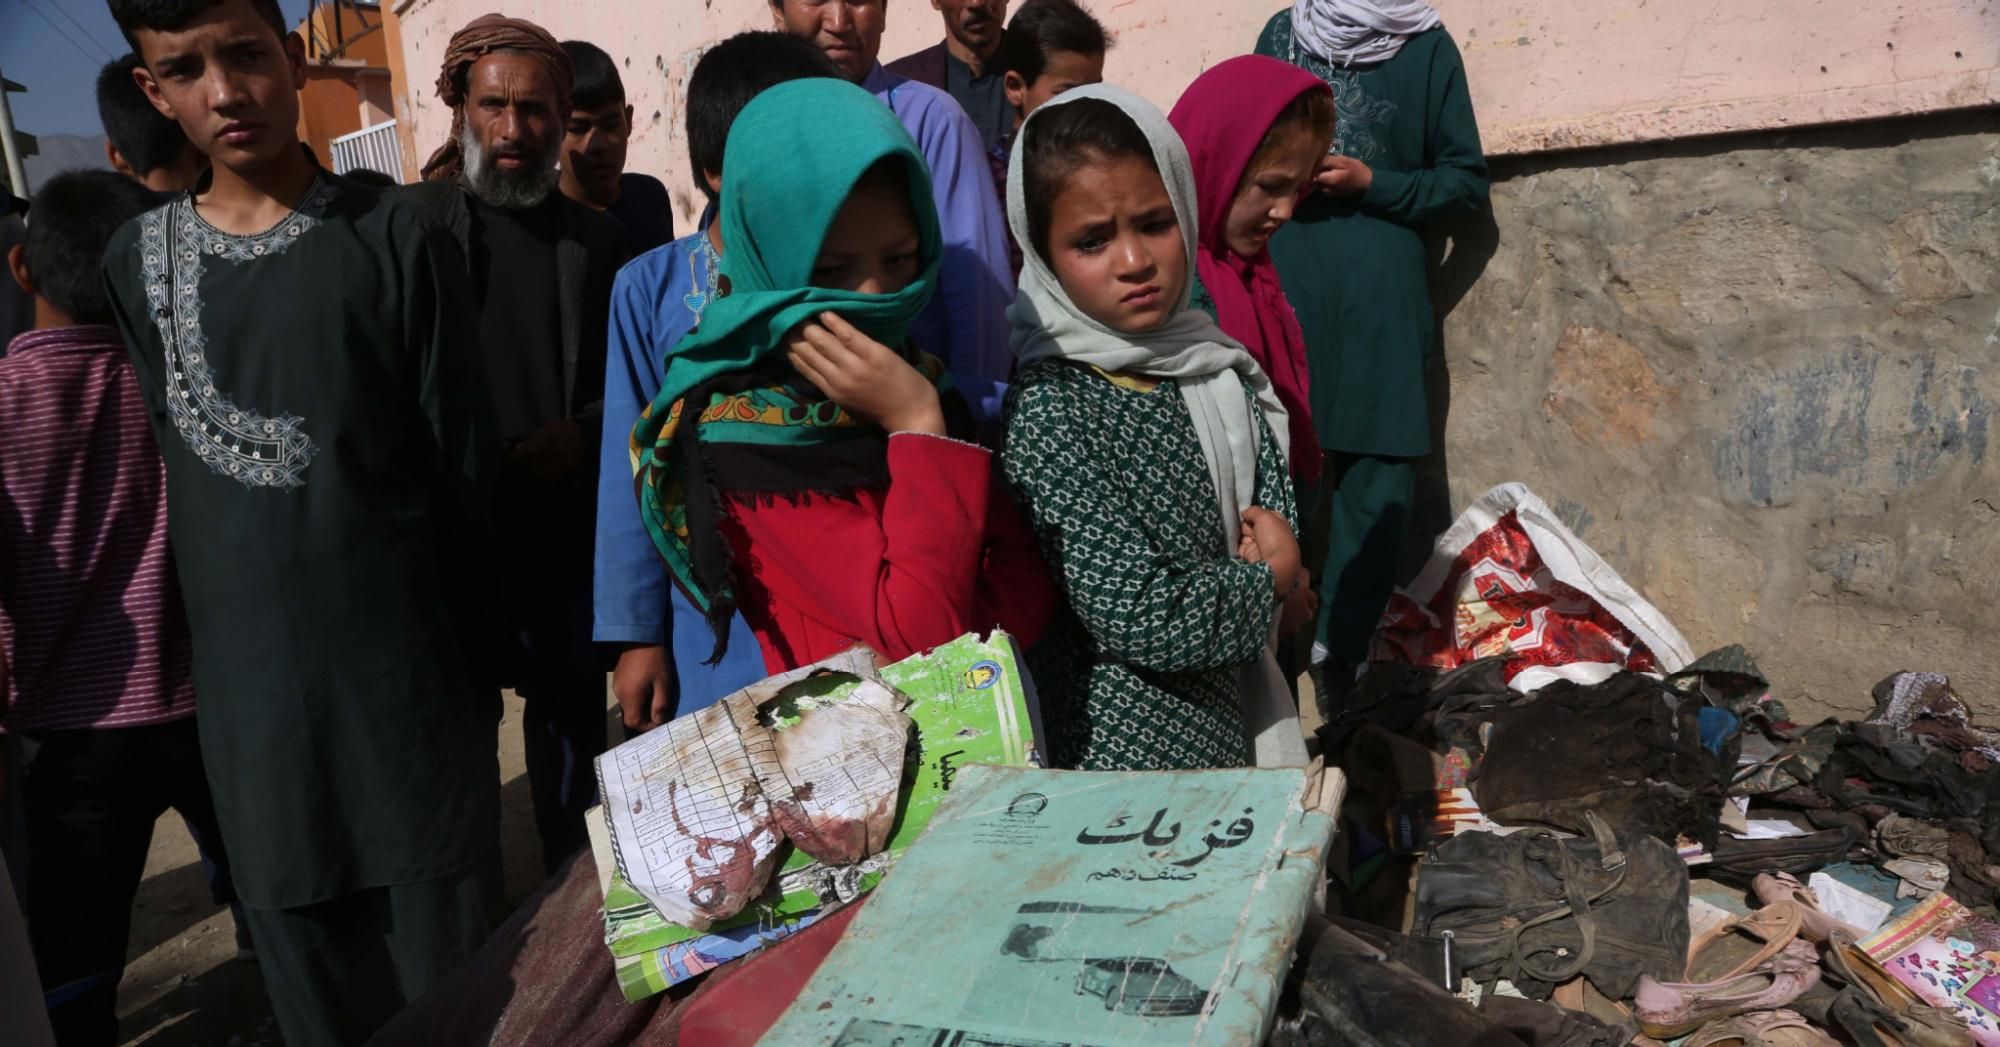 People look at the books of students who were killed in a car bomb attack outside a school in Kabul, capital of Afghanistan, on May 8, 2021. (Photo: Rahmatullah Alizadah/Xinhua via Getty Images)